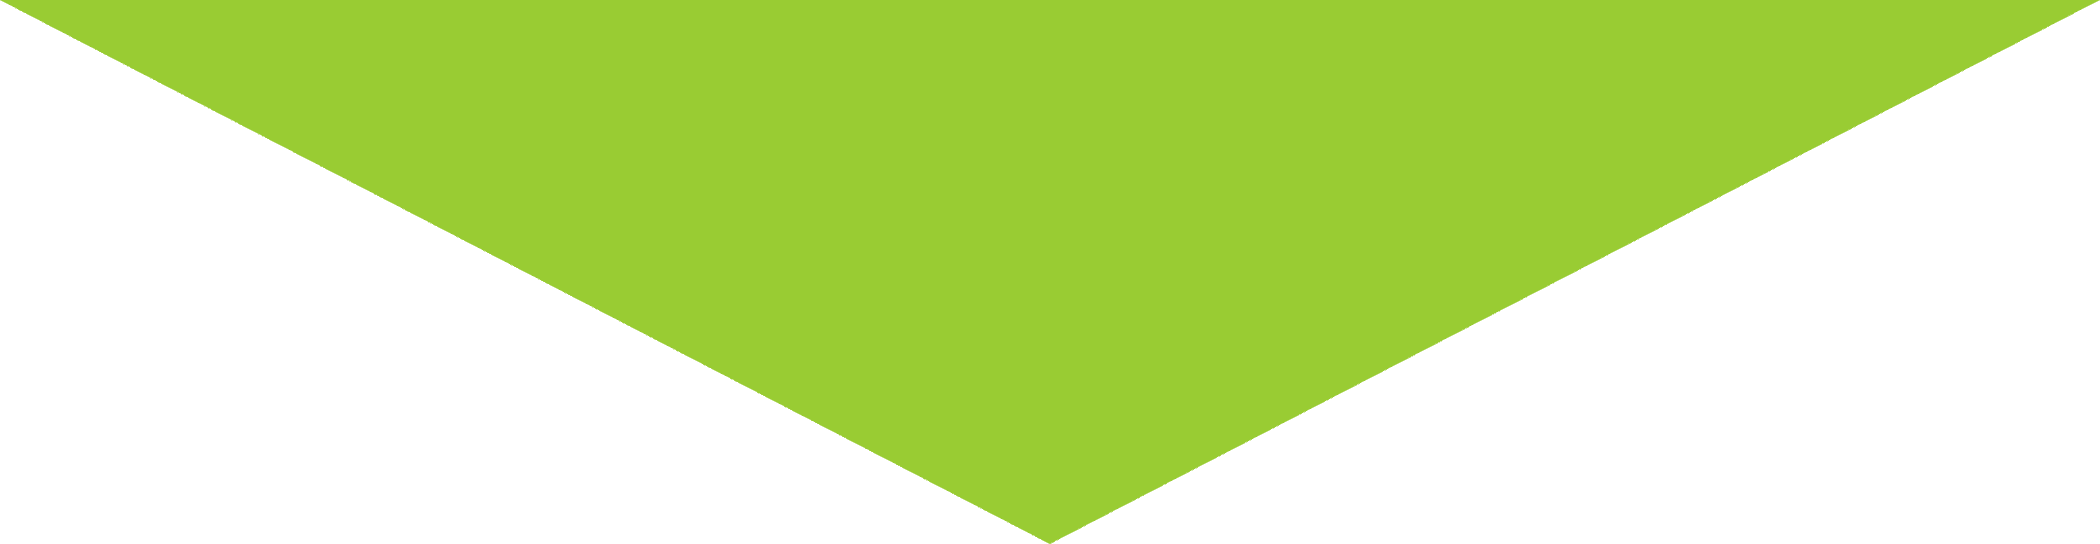 Triangle, Arrow, Down, Apple Green, Colorfulness, Green